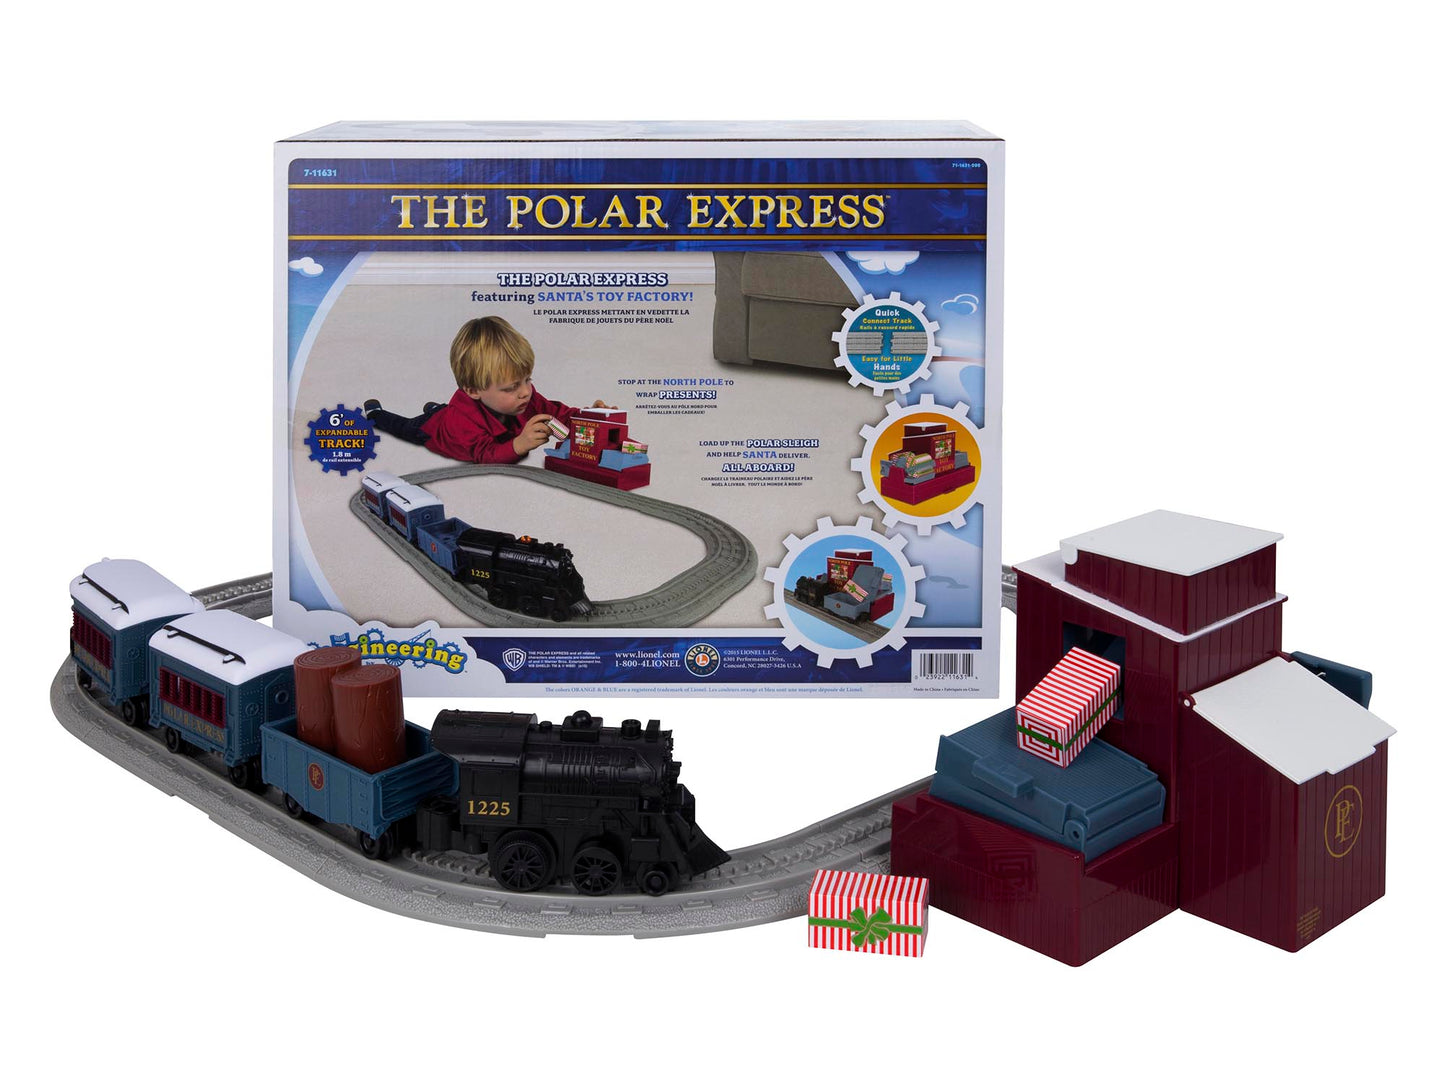 Lionel 7-11631 The Polar Express Imagineering Play Set